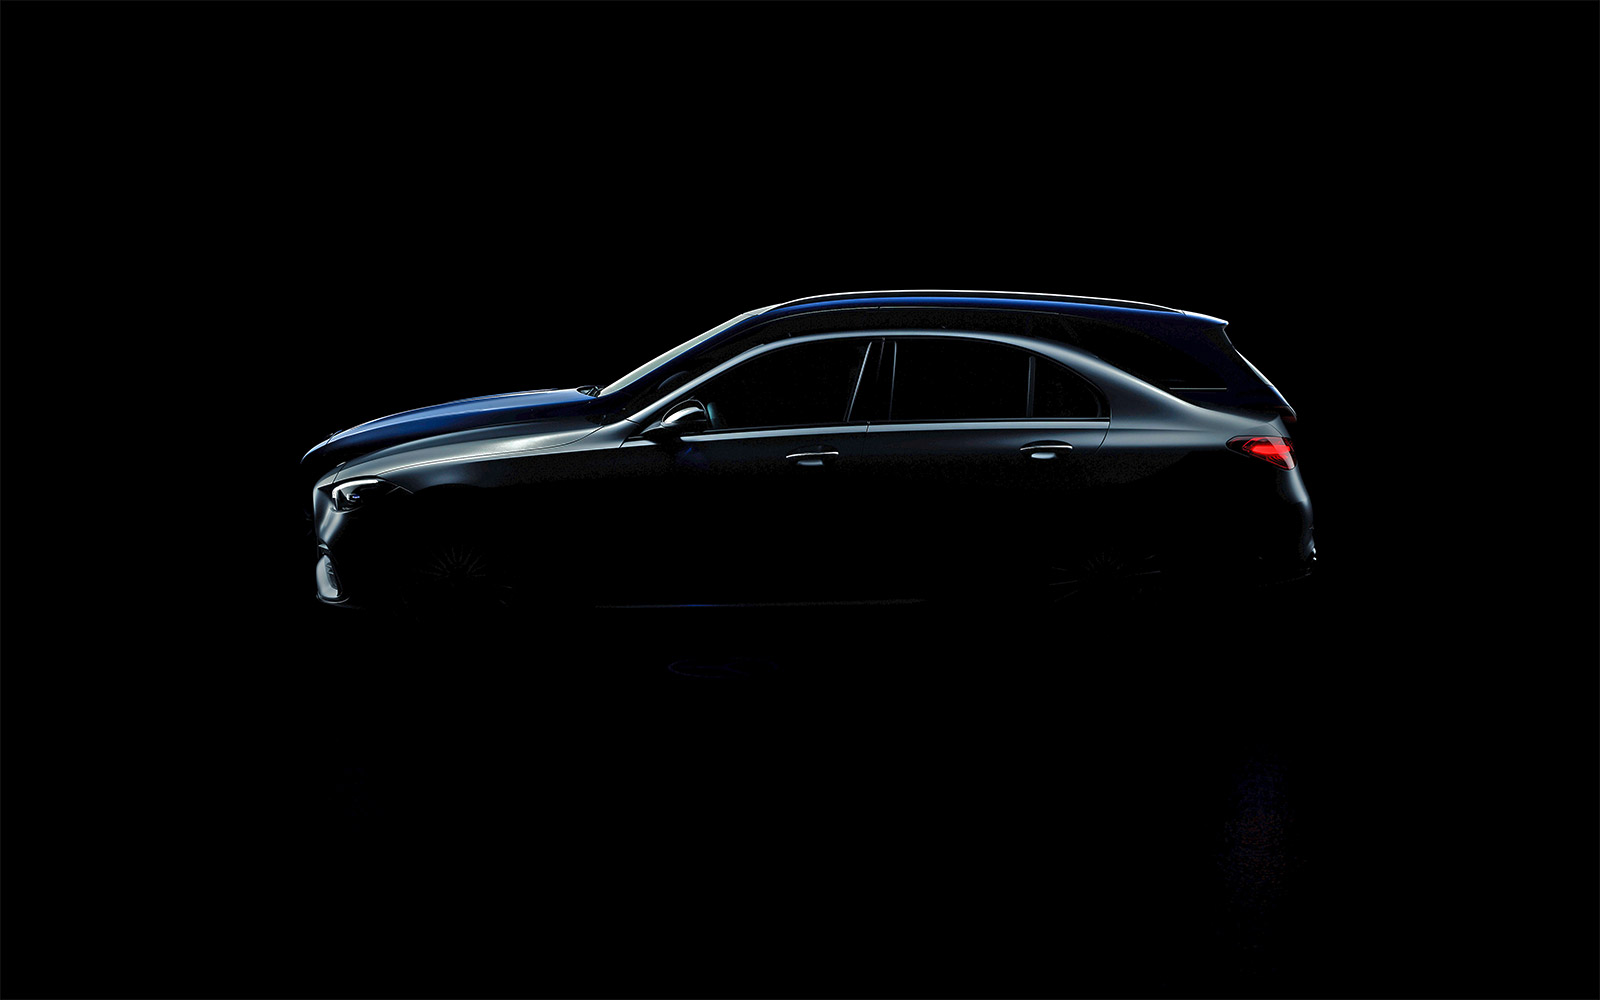 The 22 Mercedes Benz C Class Is Officially Almost Here Full Reveal Coming February 23 The Fast Lane Car